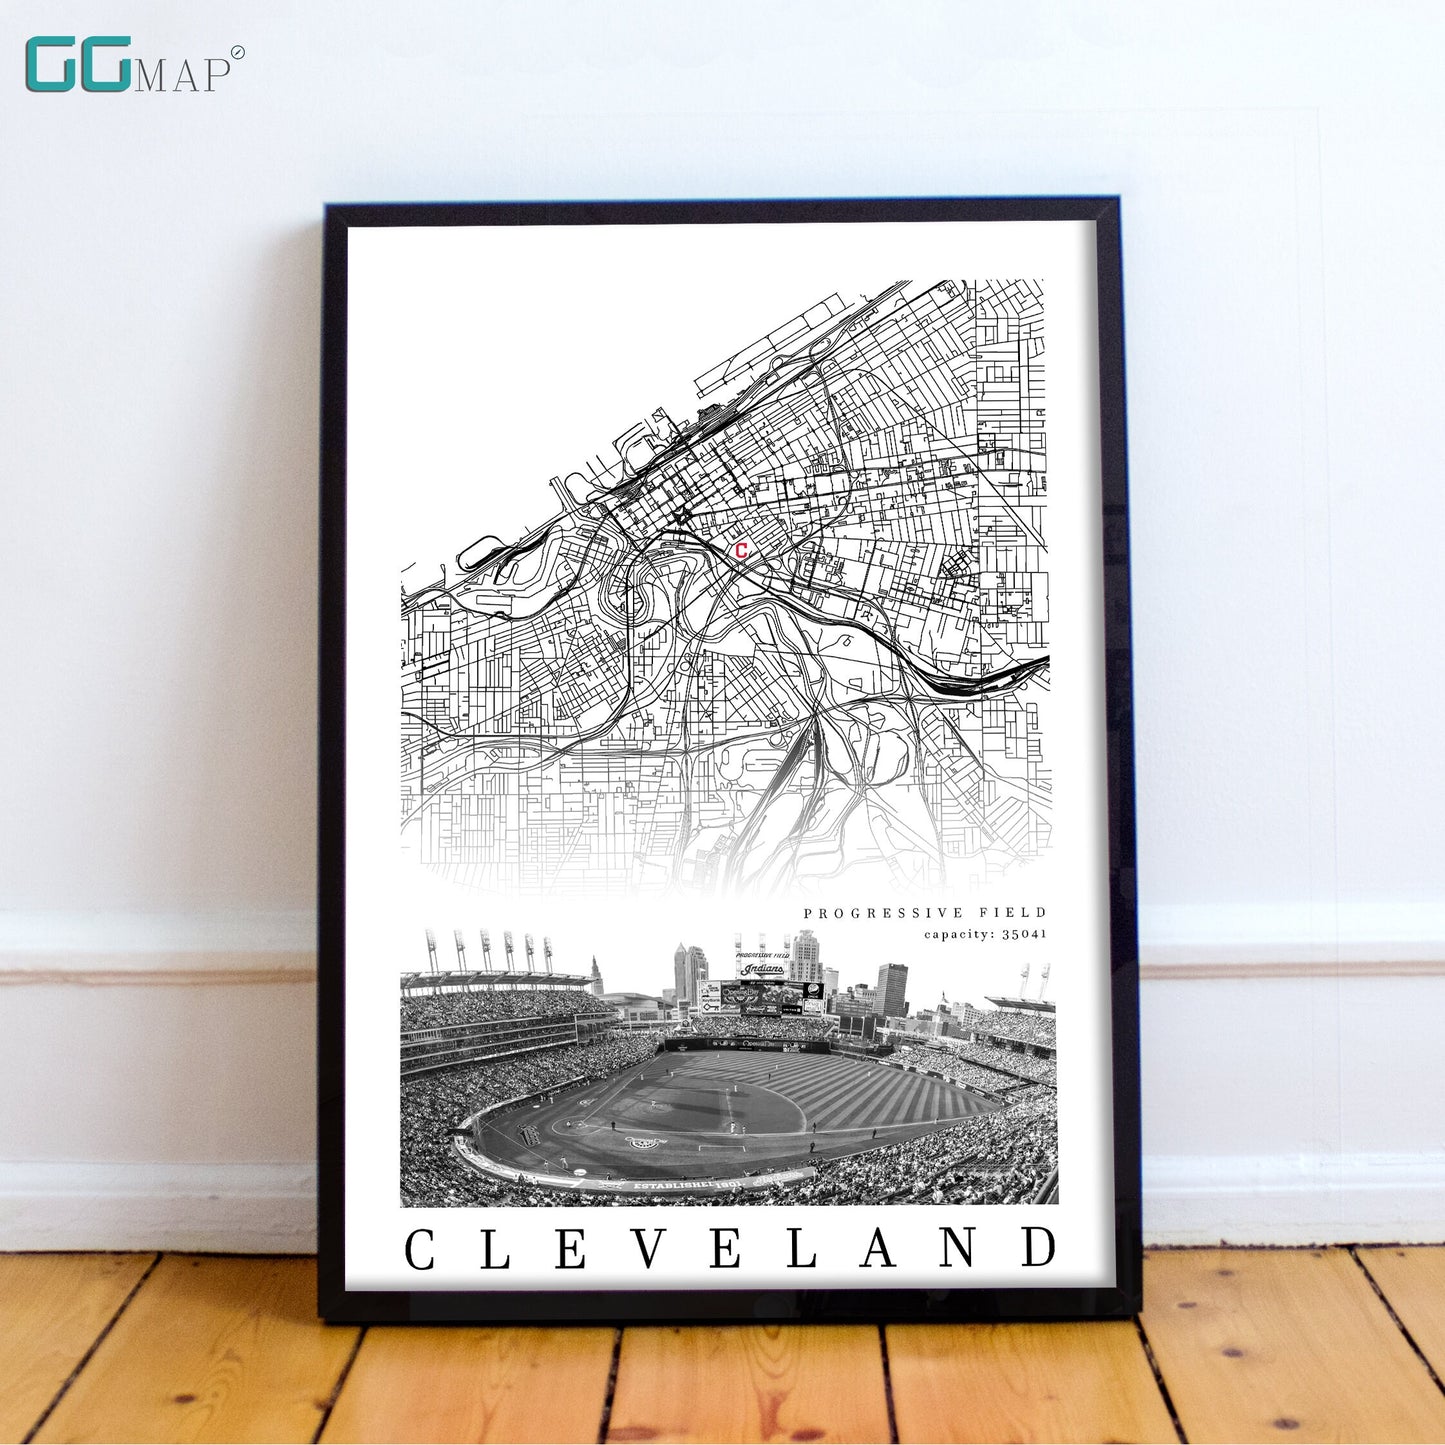 City map of CLEVELAND - Progressive Field - Home Decor Cleveland -Progressive Field wall decor - Print map - Cleveland Indians